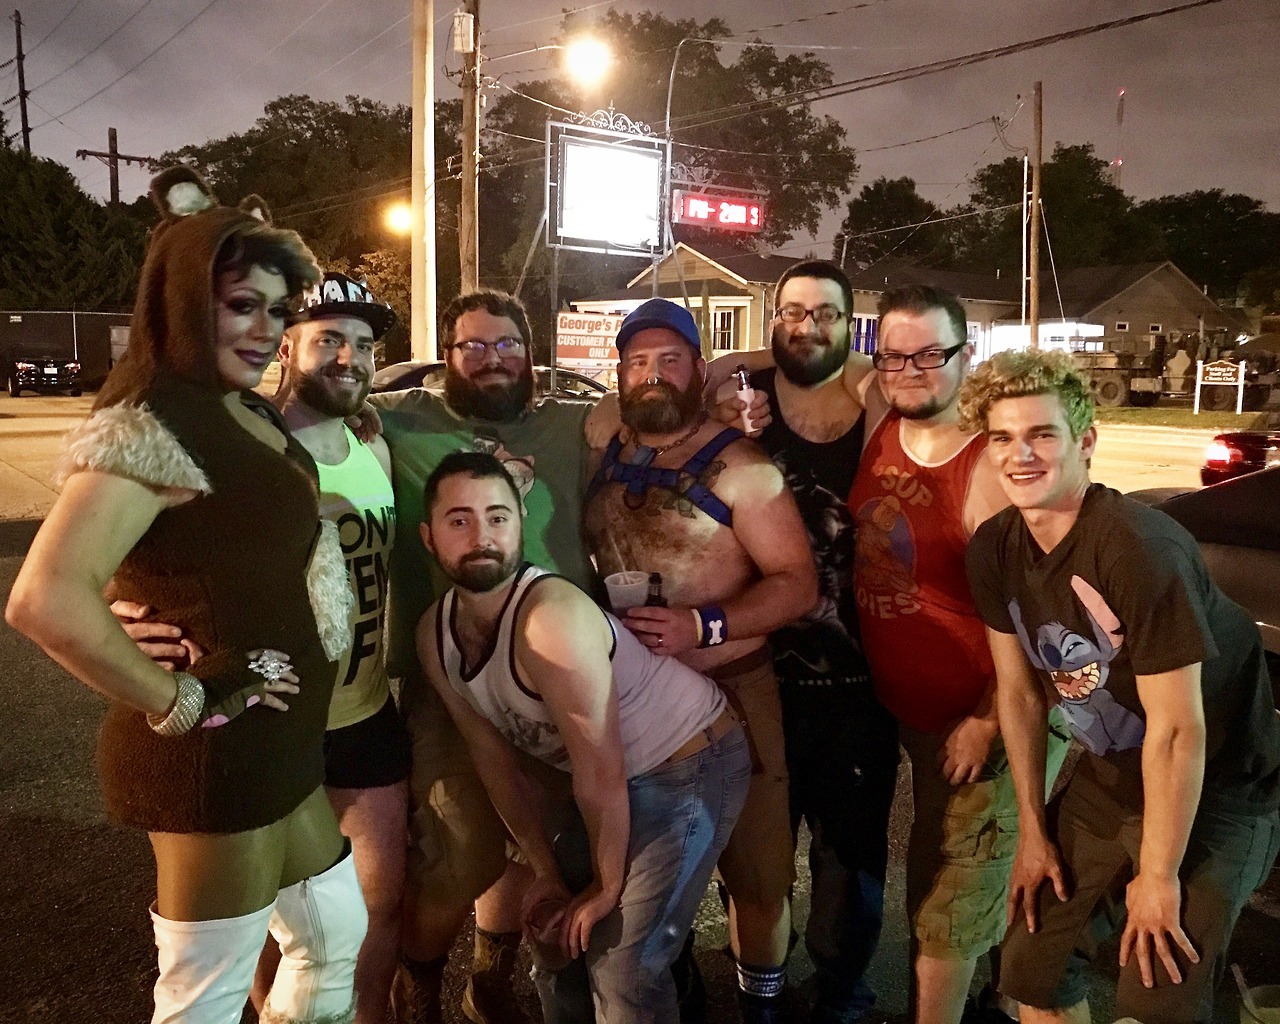 Our crew from our first Bears Night at one of our local gay bars. On my far right